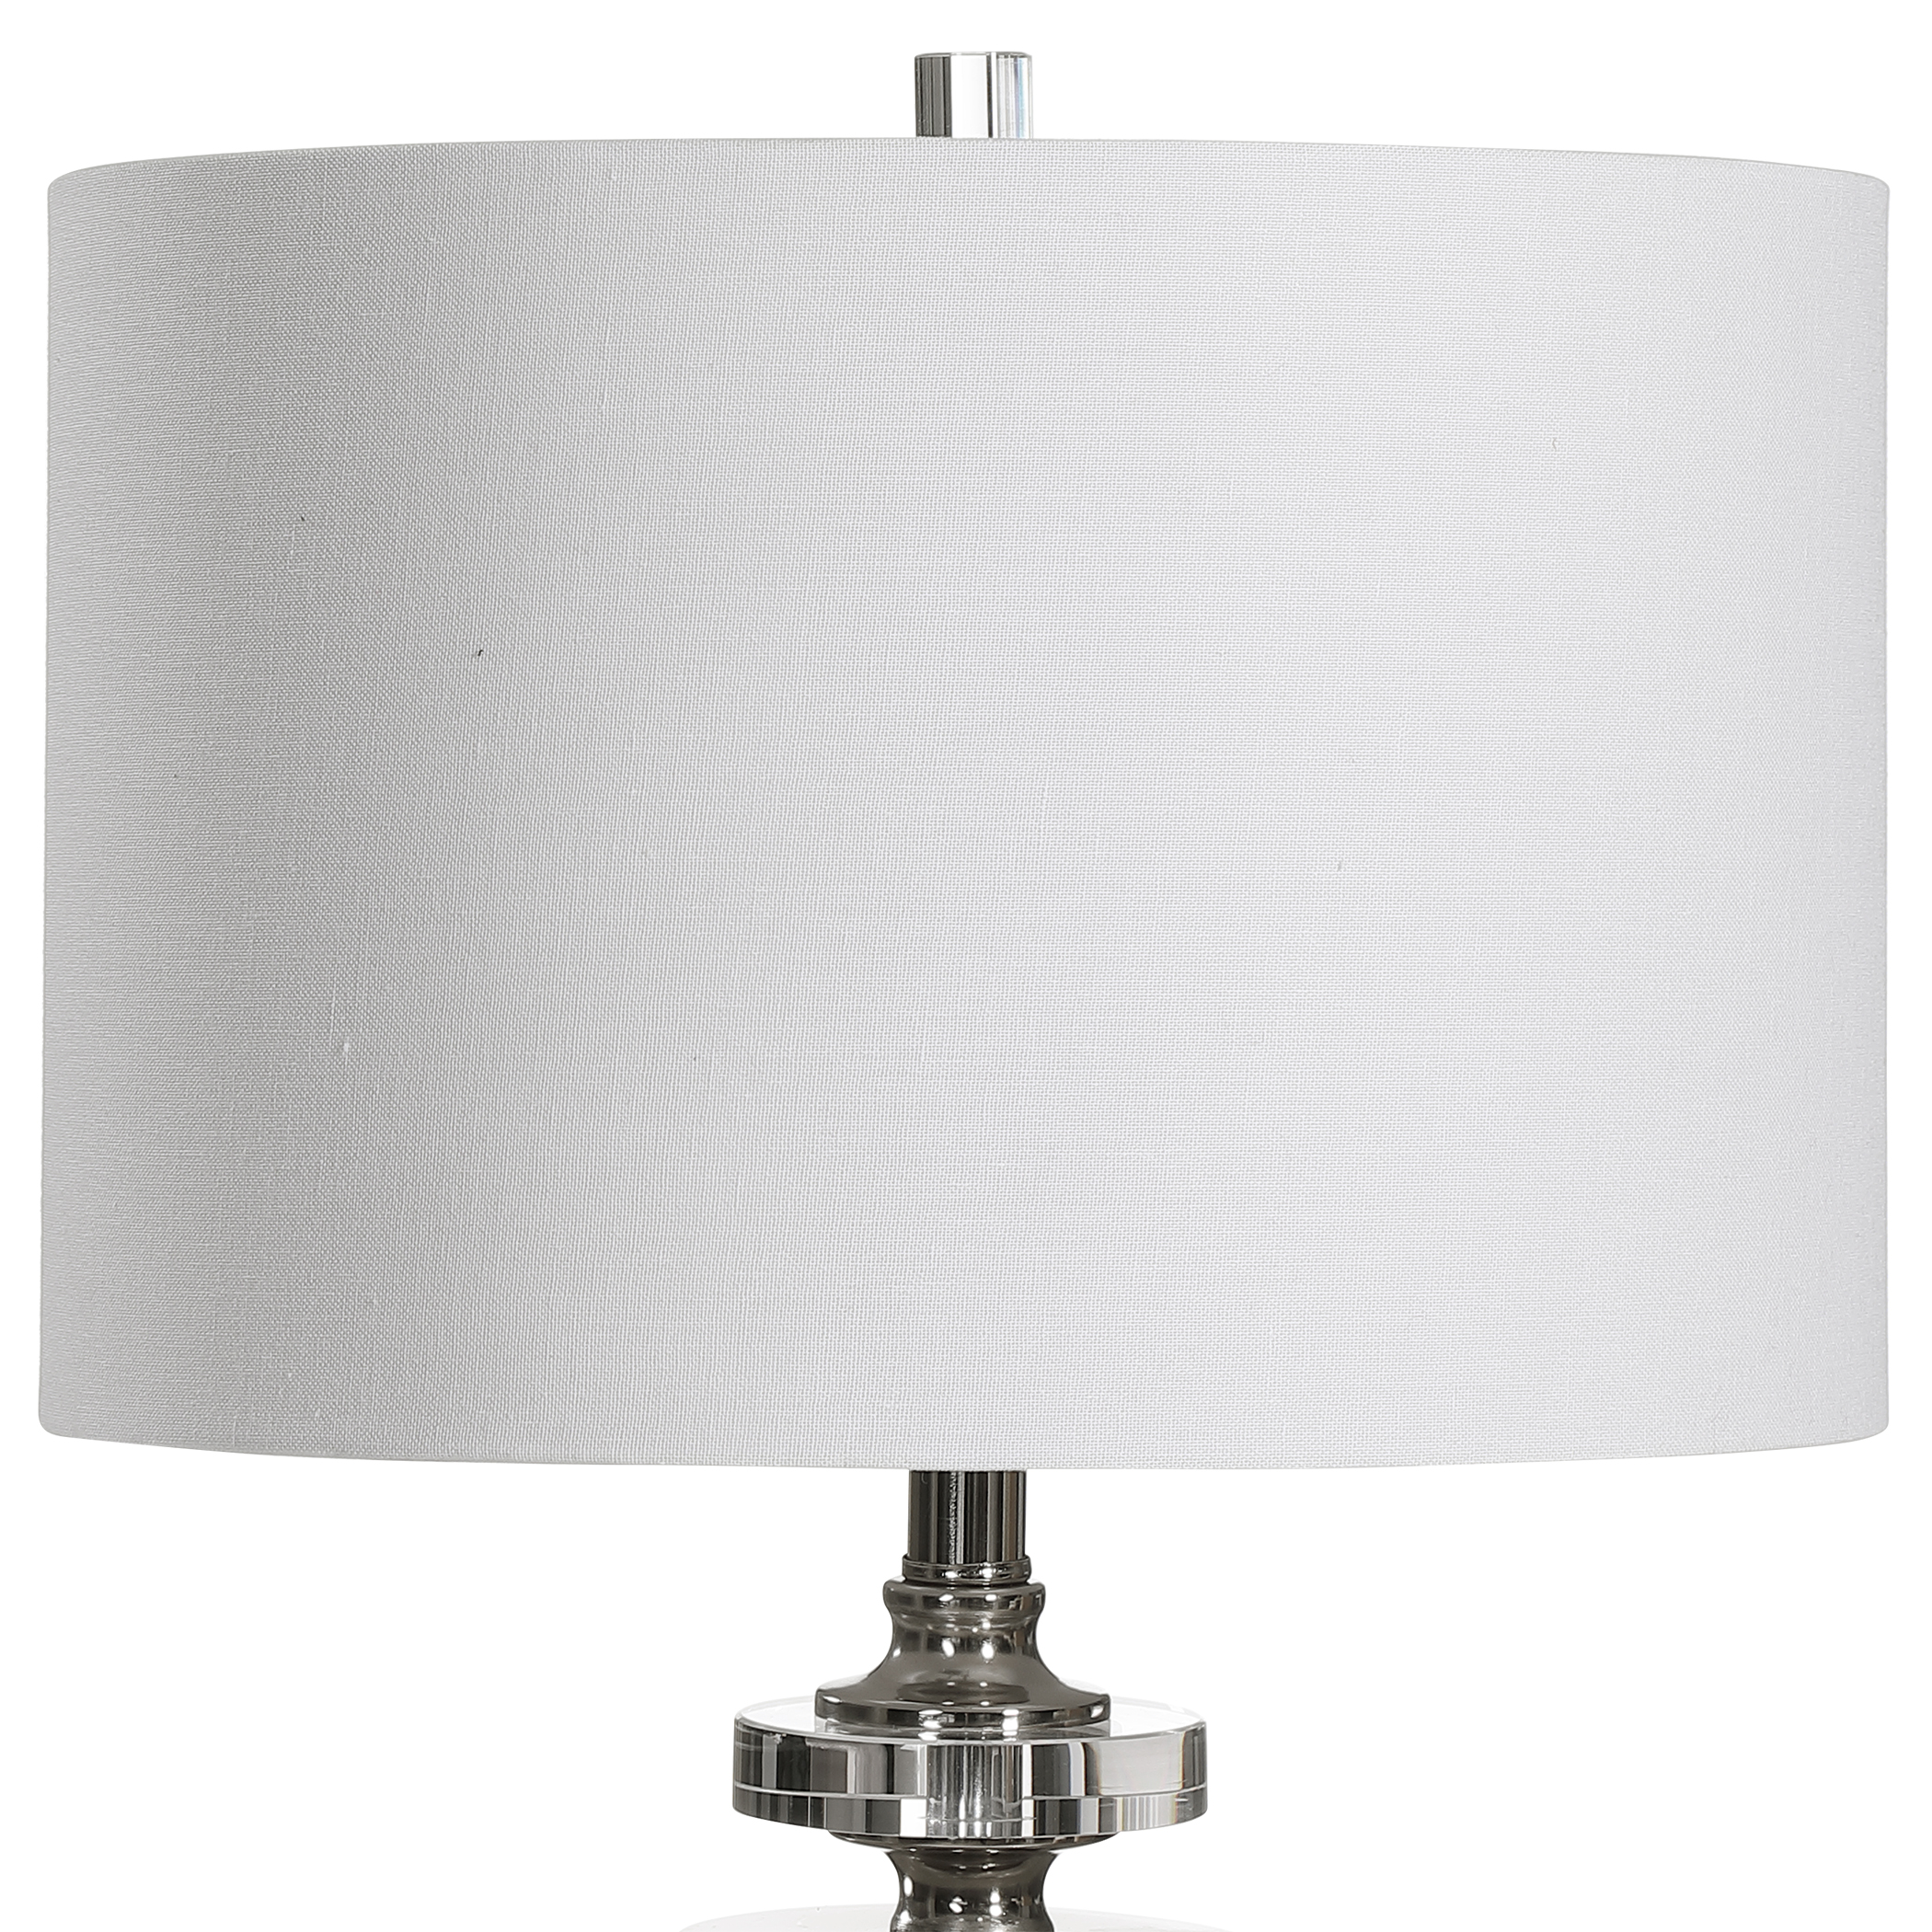 Calia White Table Lamp by Uttermost